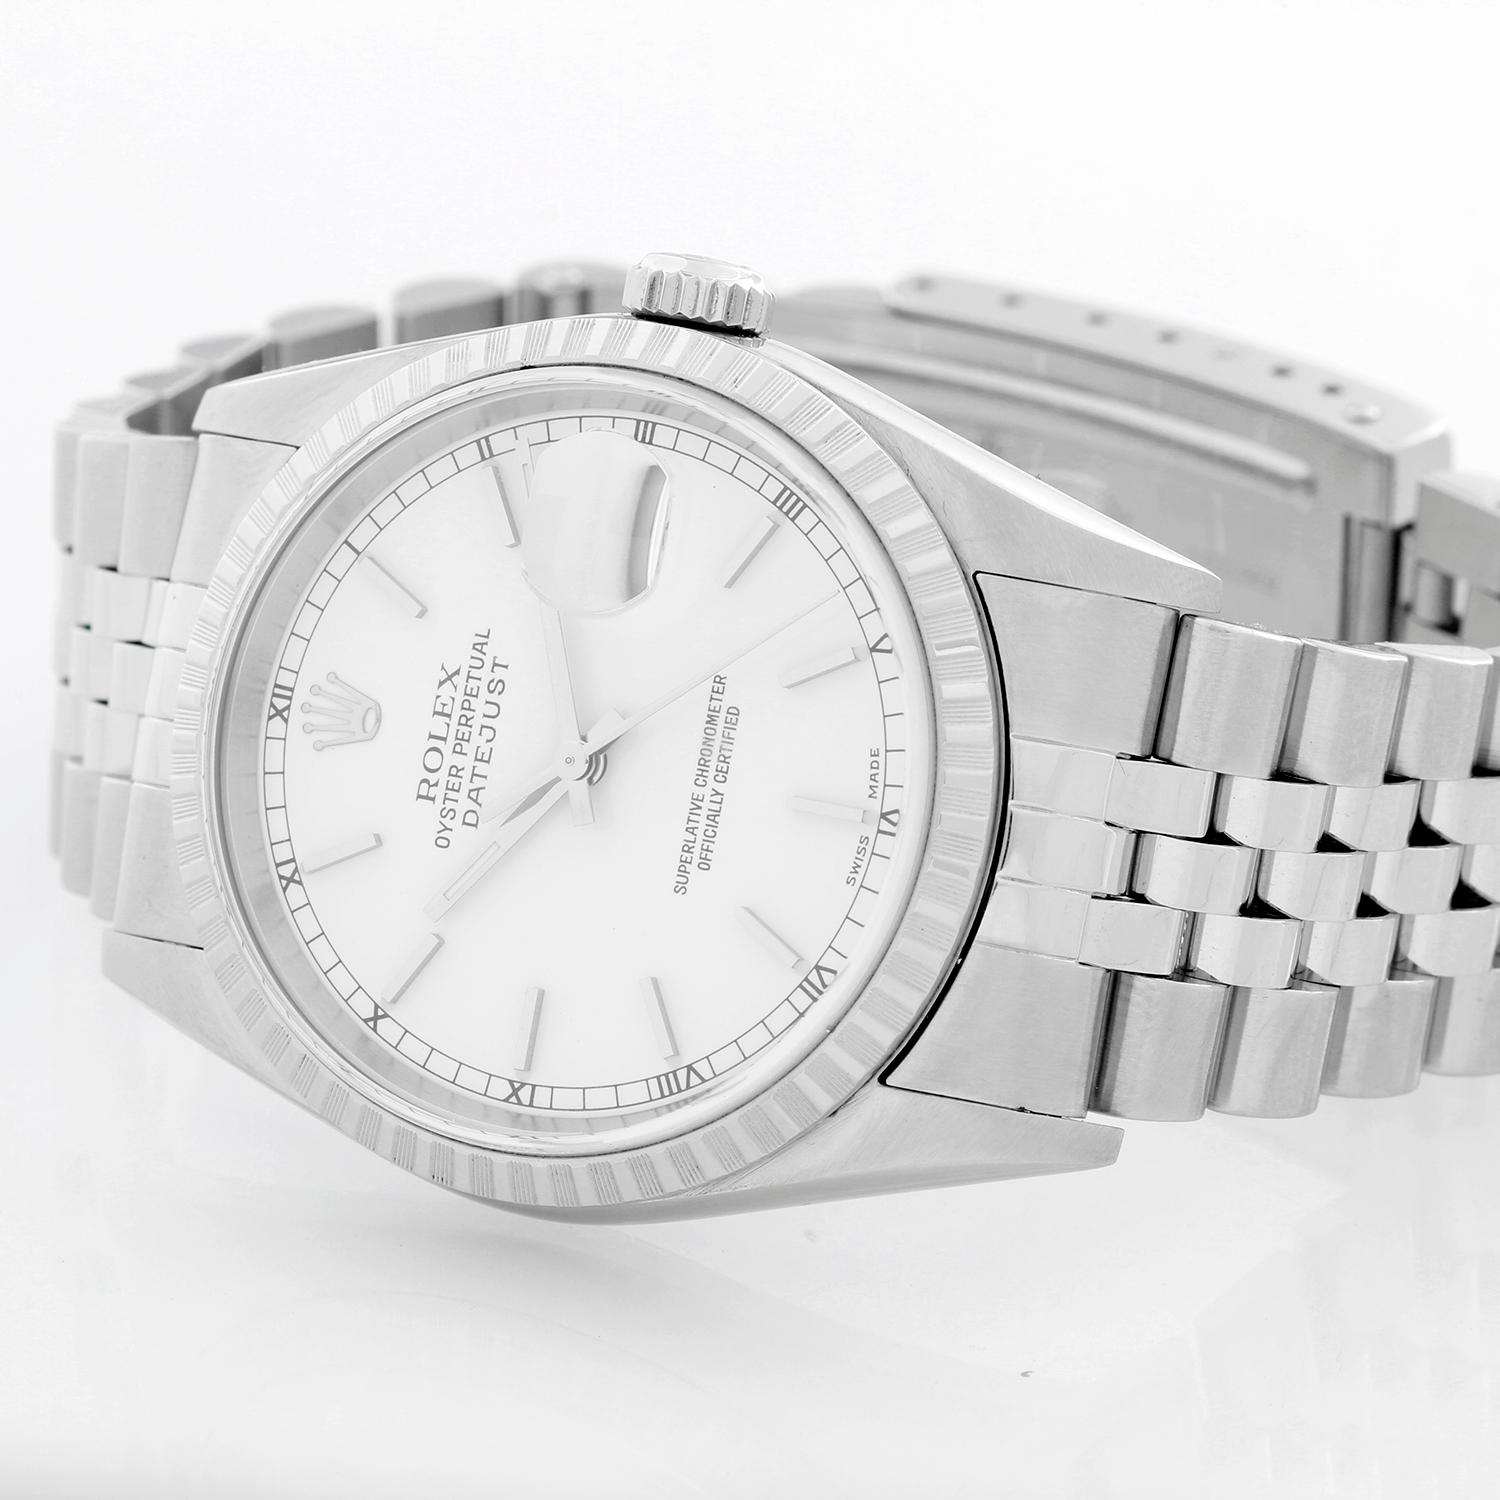 Rolex Datejust Men's Stainless Steel Watch 16220 - Automatic winding, 31 jewels, Quickset, sapphire crystal. Stainless steel case with engine turned bezel (36mm diameter). White dial with stick hour markers. Stainless steel Jubilee bracelet.